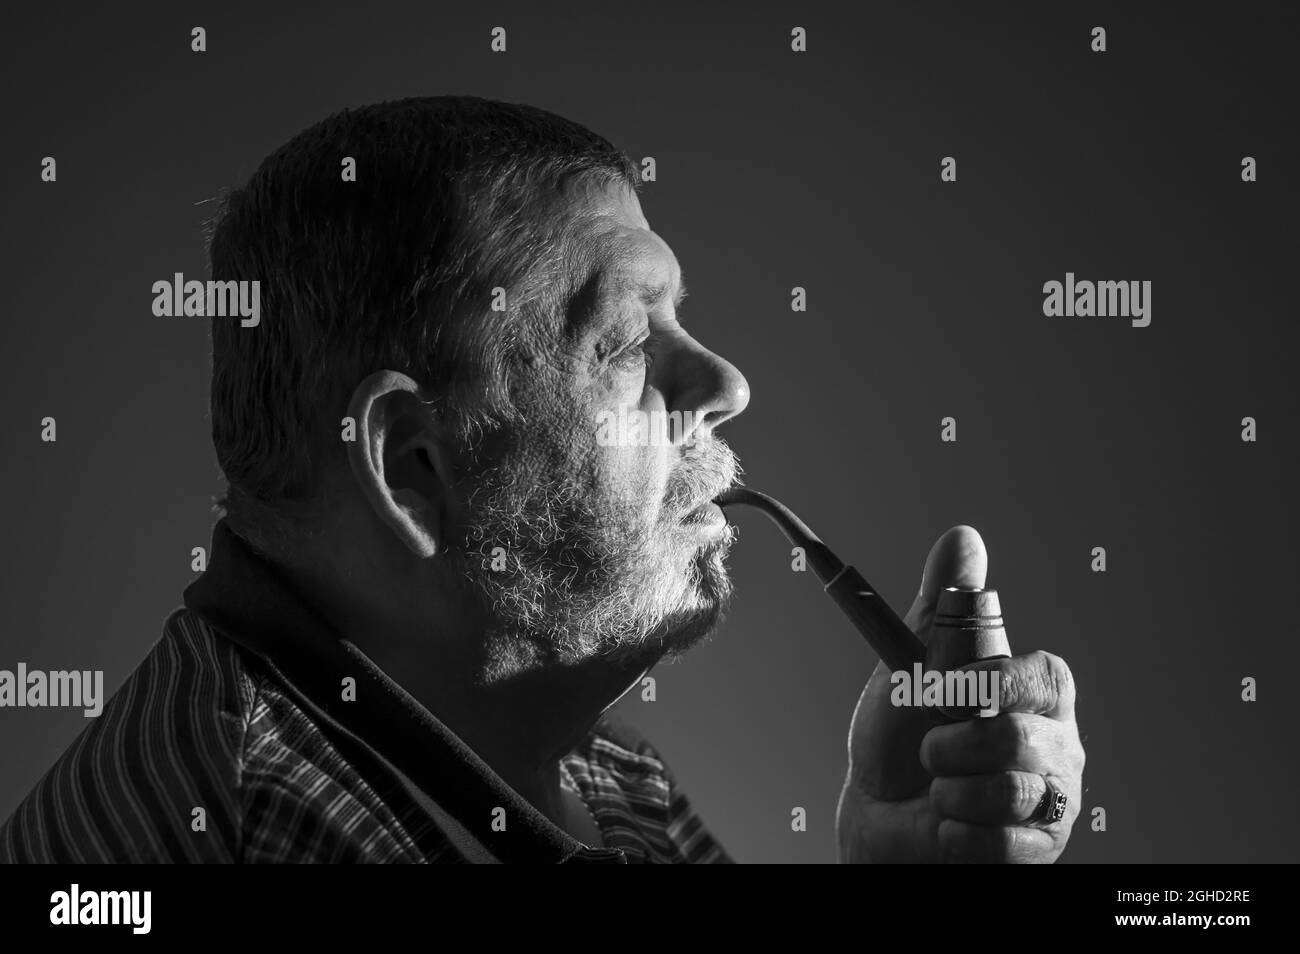 Black and white low key portrait of Caucasian bearded man smoking tobacco pipe against dark background Stock Photo